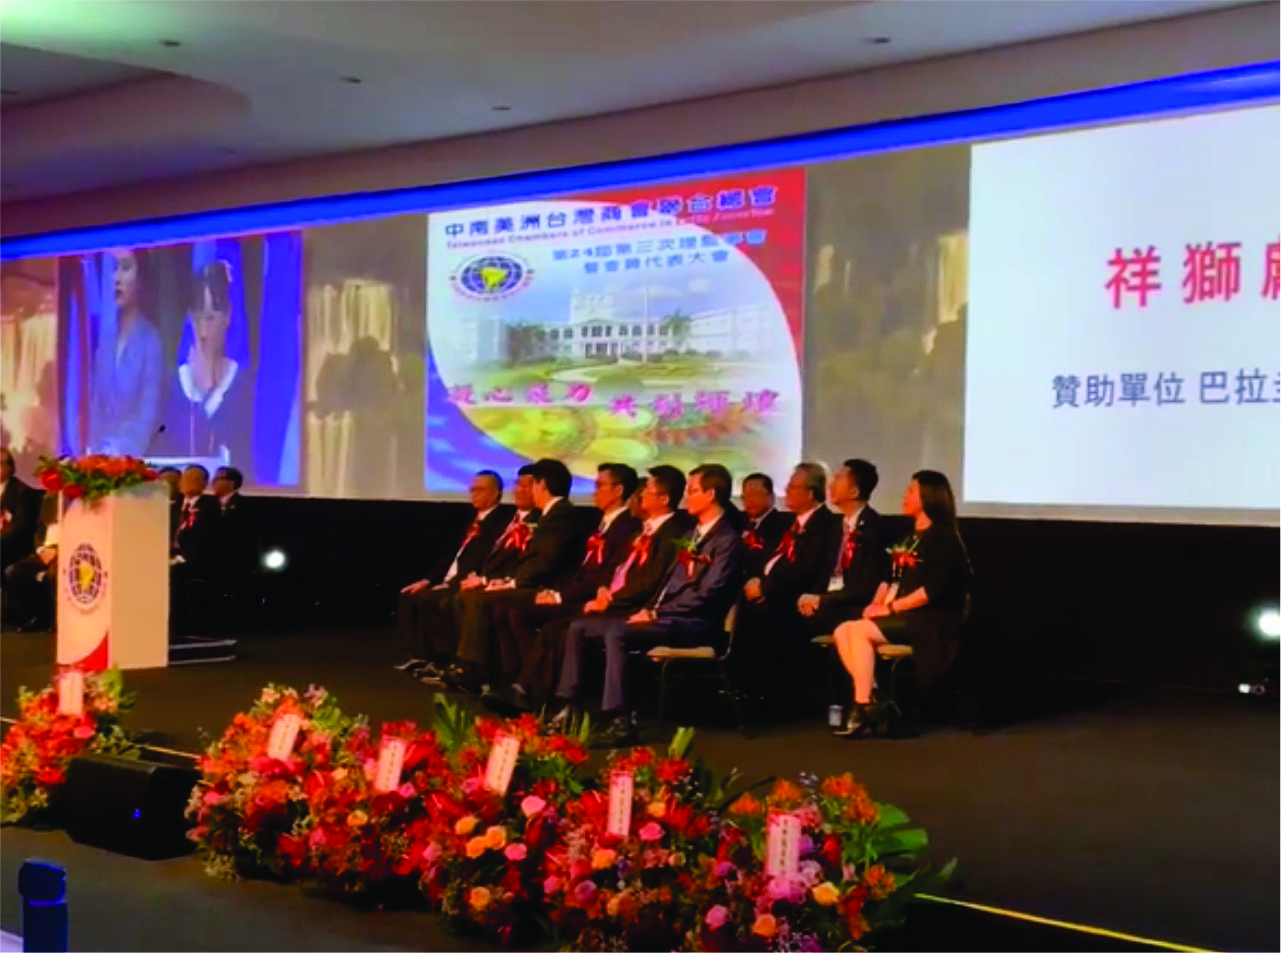 24th Meeting of the Taiwanese Chamber of Commerce in Latin America 0